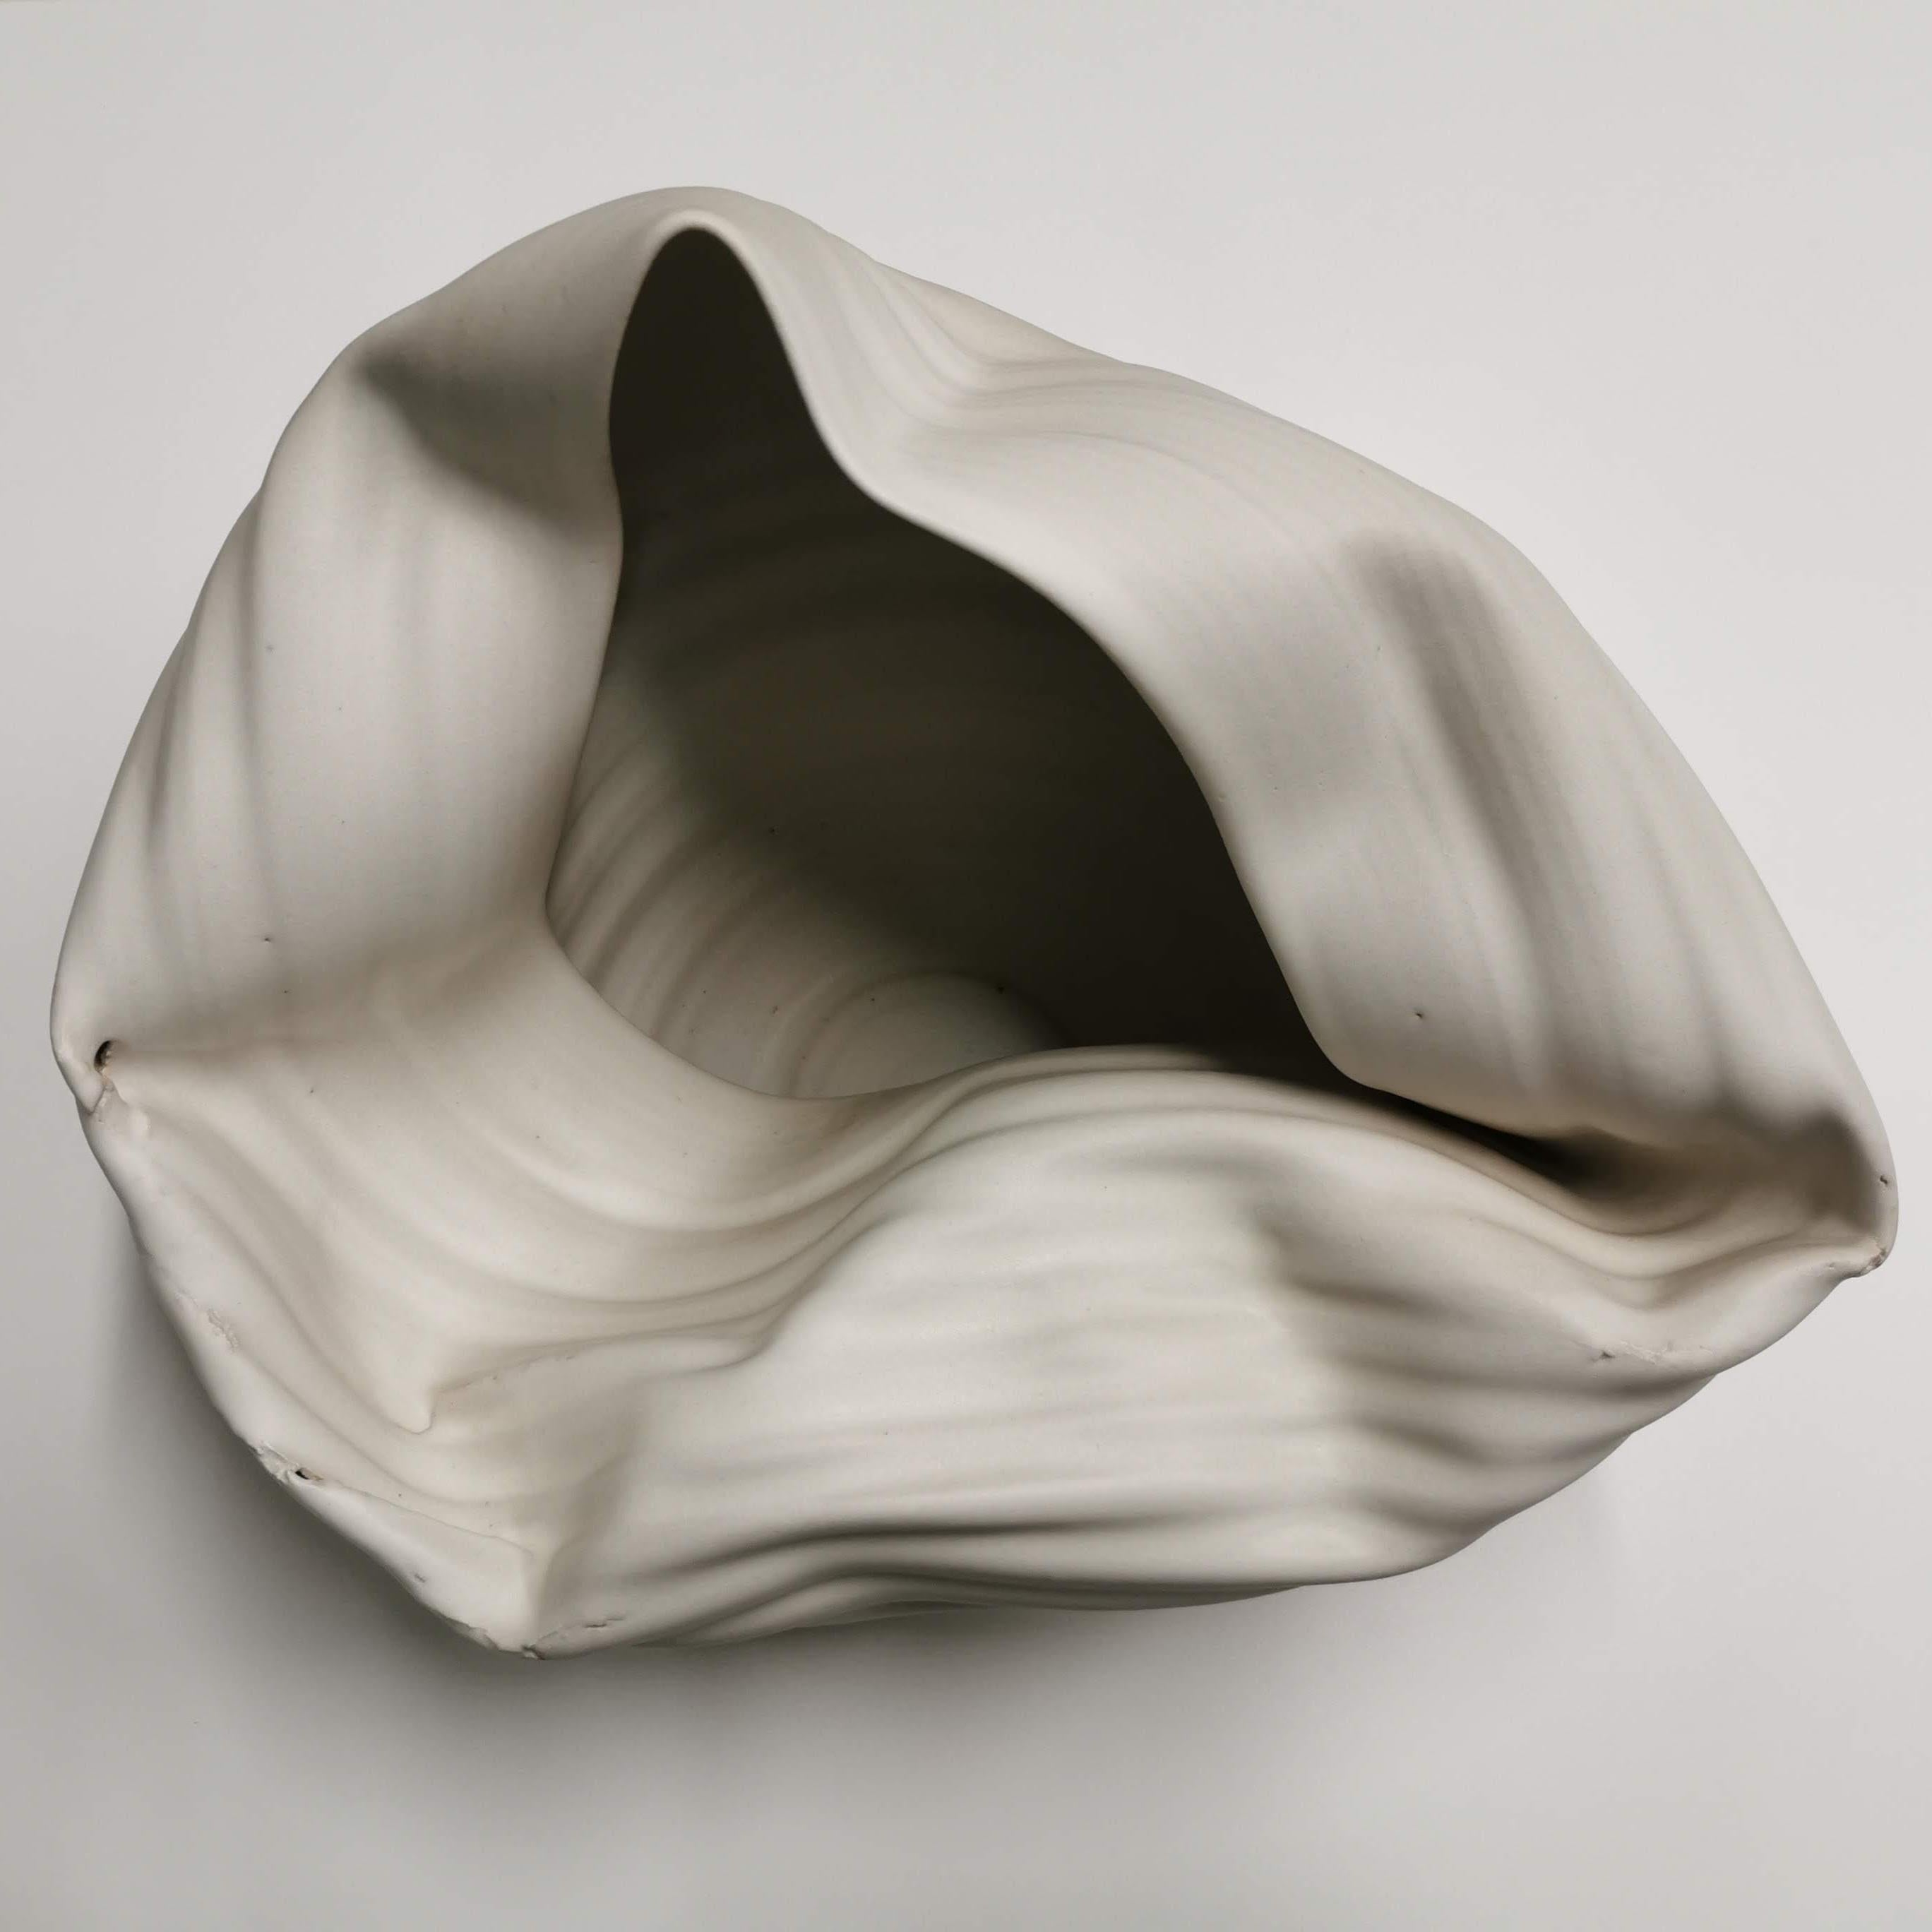 Sumptuous ceramic vessel from ceramic artist Nicholas Arroyave-Portela.

Materials. White St. Thomas clay. Stoneware glazes. Multi fired to cone 9 (1260-1280 degrees)

A VIDEO OF THE PIECE IS AVAILABLE ON DEMAND. PLEASE DO ASK IF YOU WOULD LIKE TO